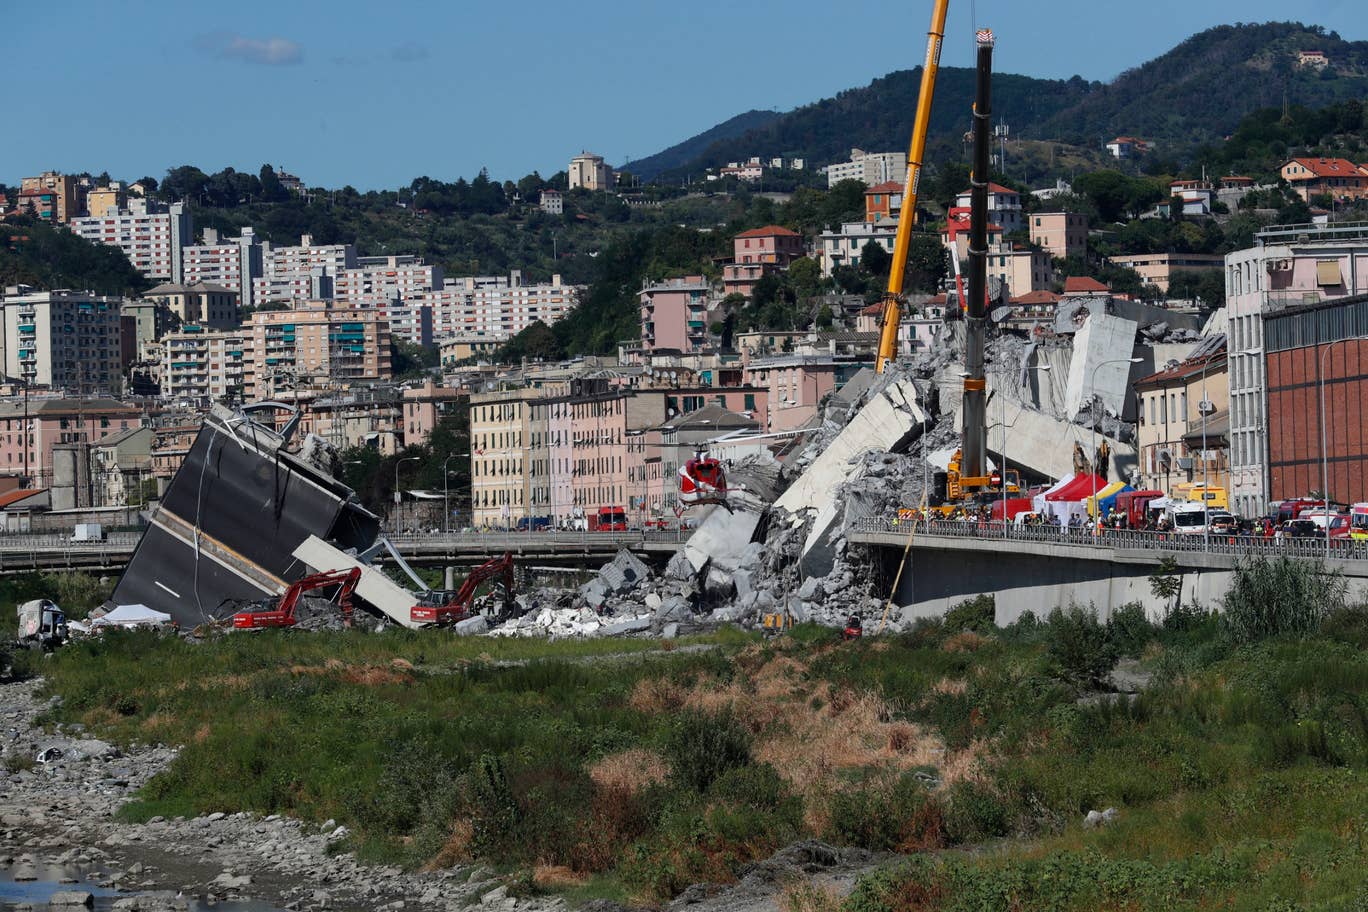 A bridge in Italay collapses due to ligtening